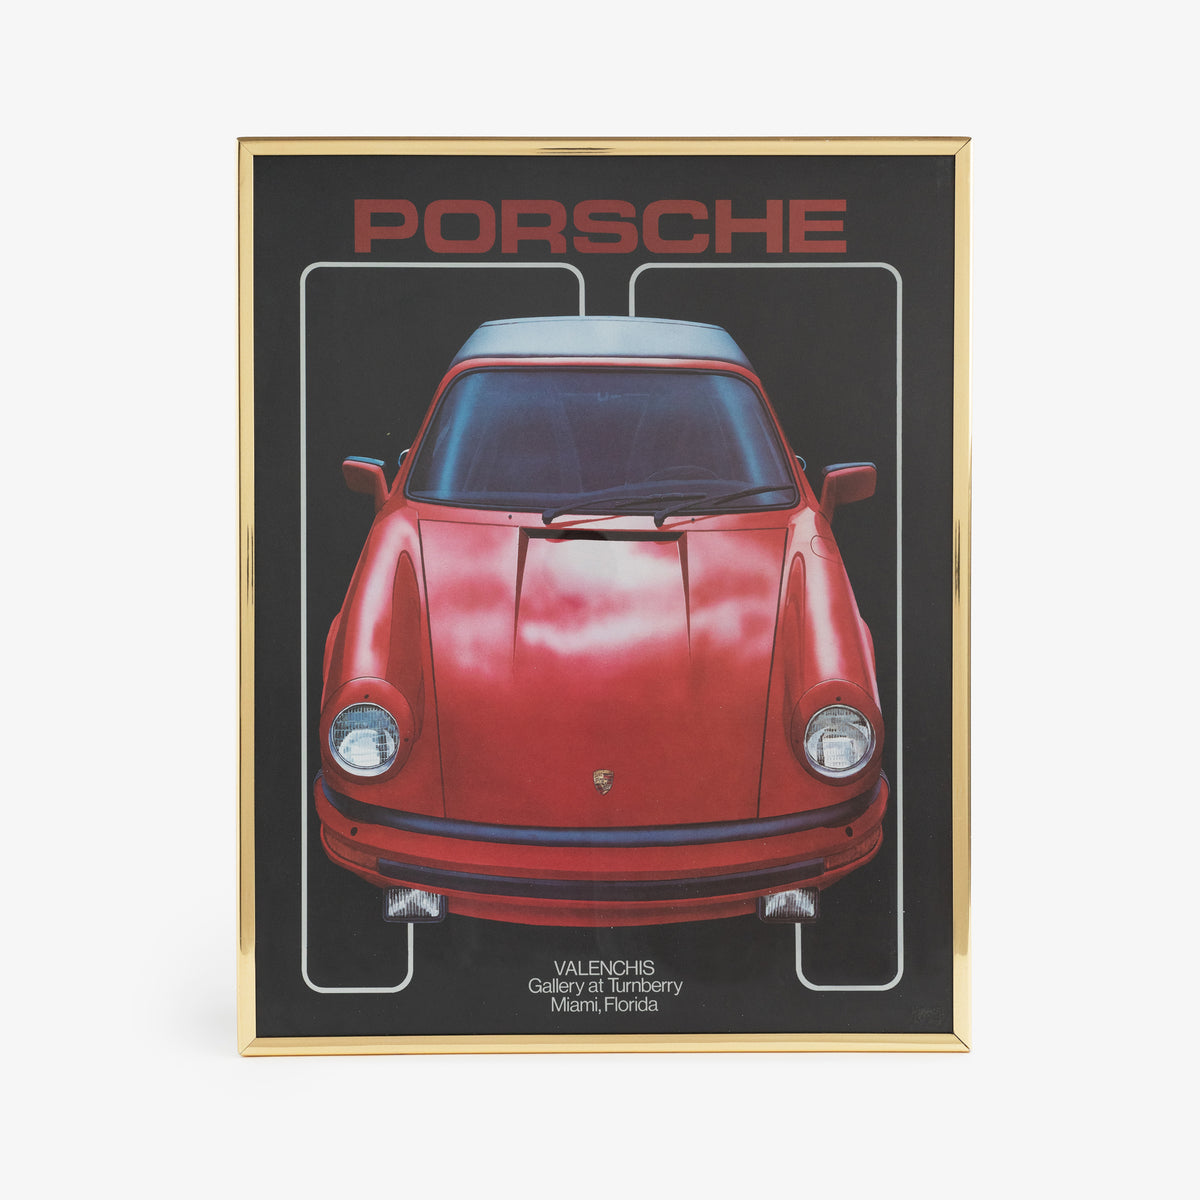 Porsche Valenchis Gallery at Turnberry Poster